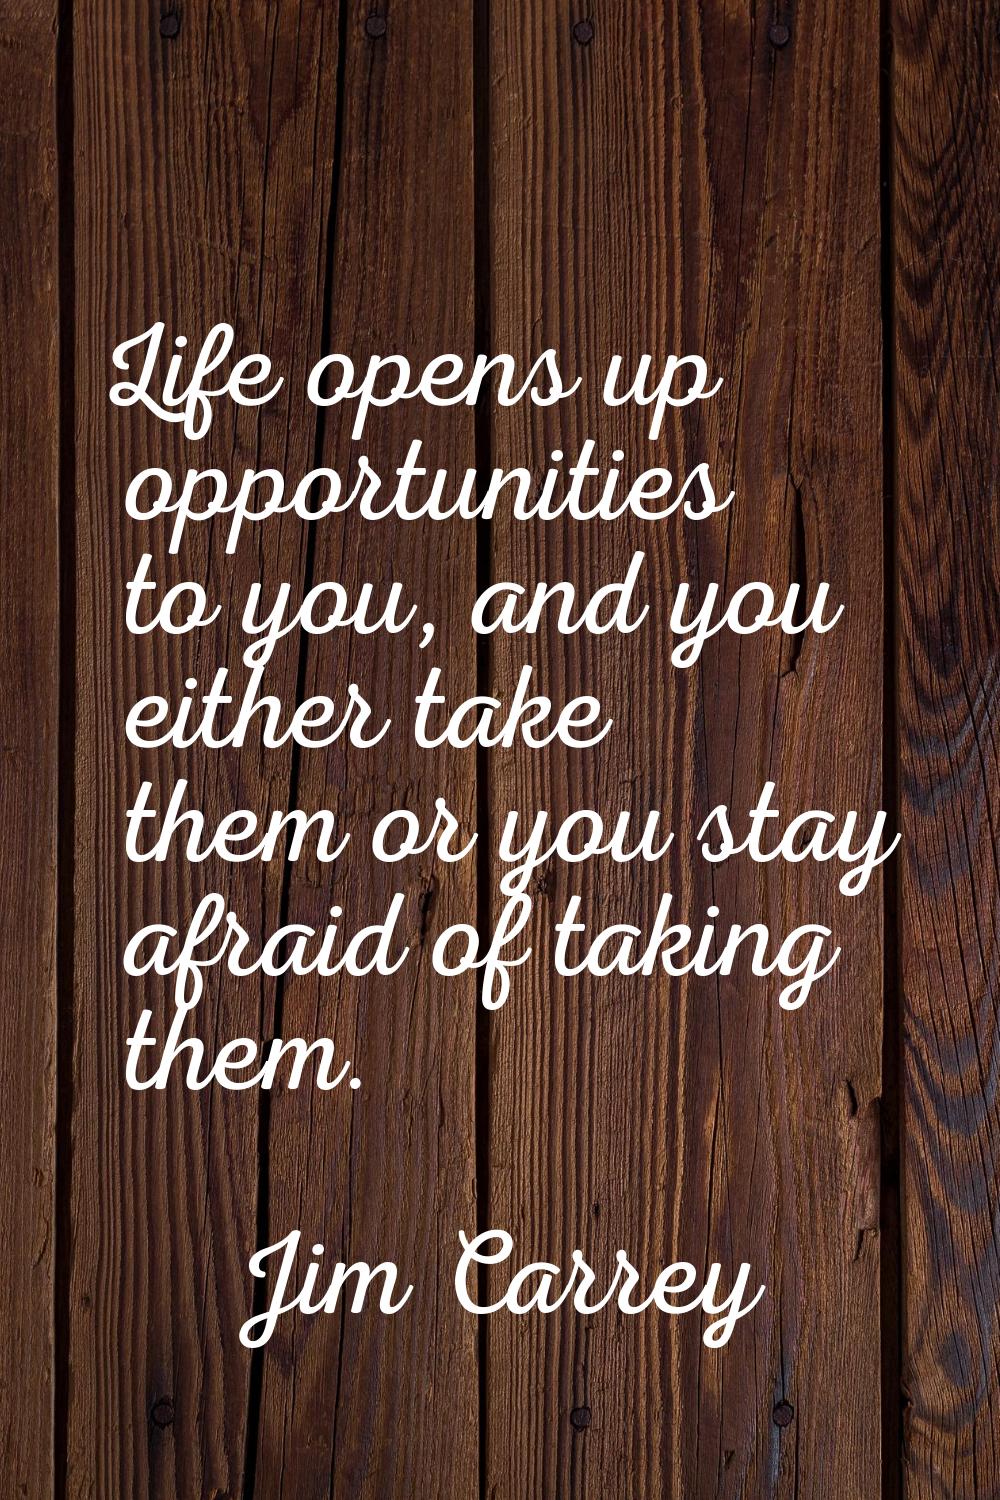 Life opens up opportunities to you, and you either take them or you stay afraid of taking them.